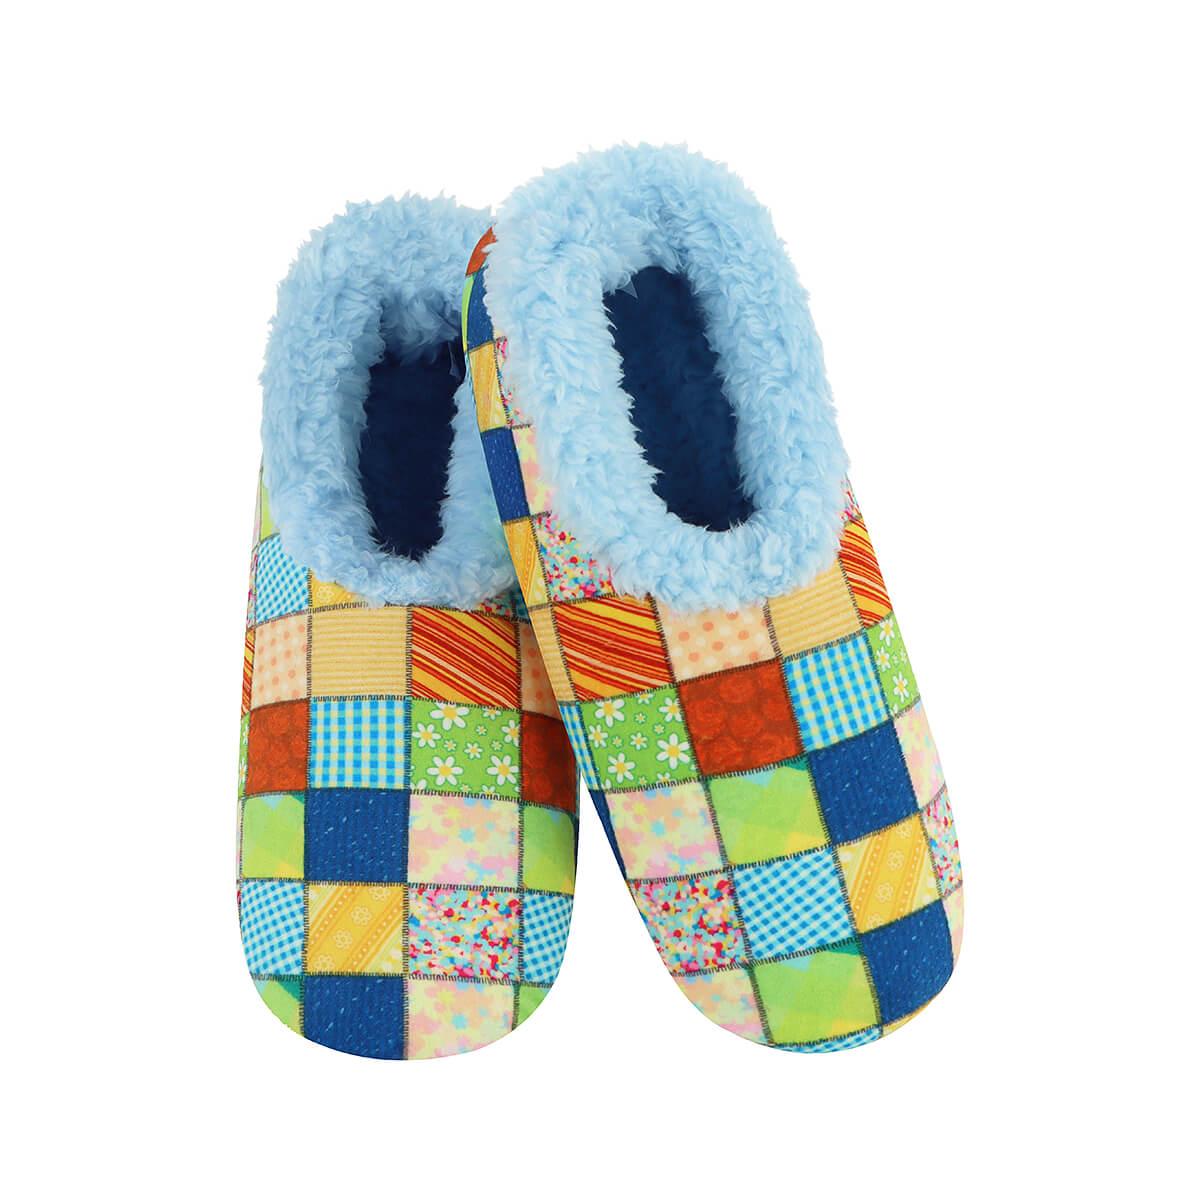  Women's Patchwork Snoozies Slippers